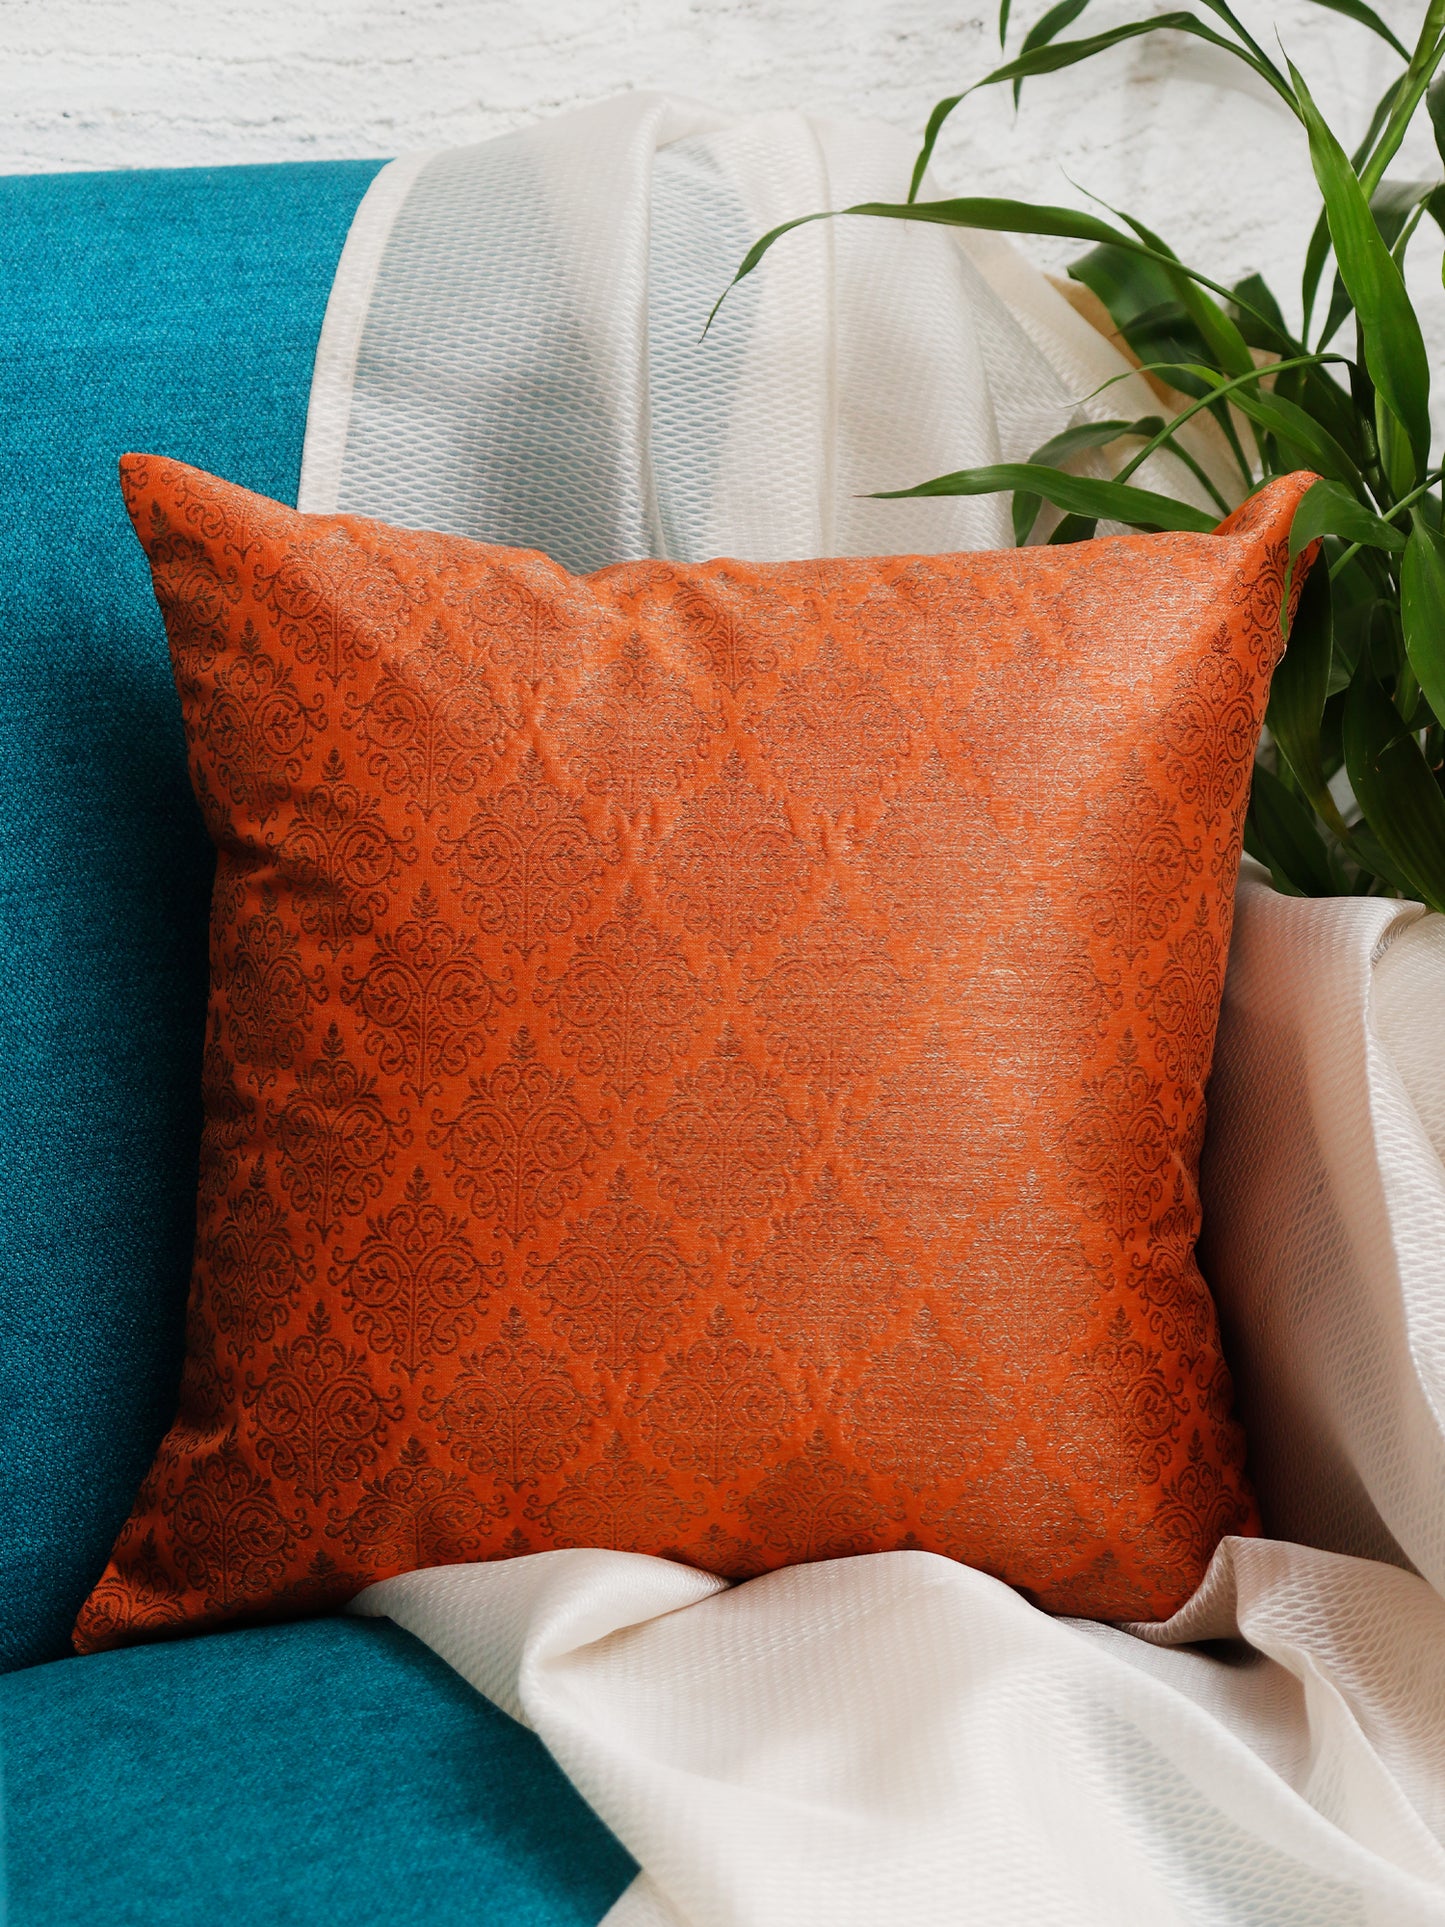 Co-ordinated Cushion Cover Set of 5 Cotton Blend Self Textured Brocade Orange - 16" X 16"